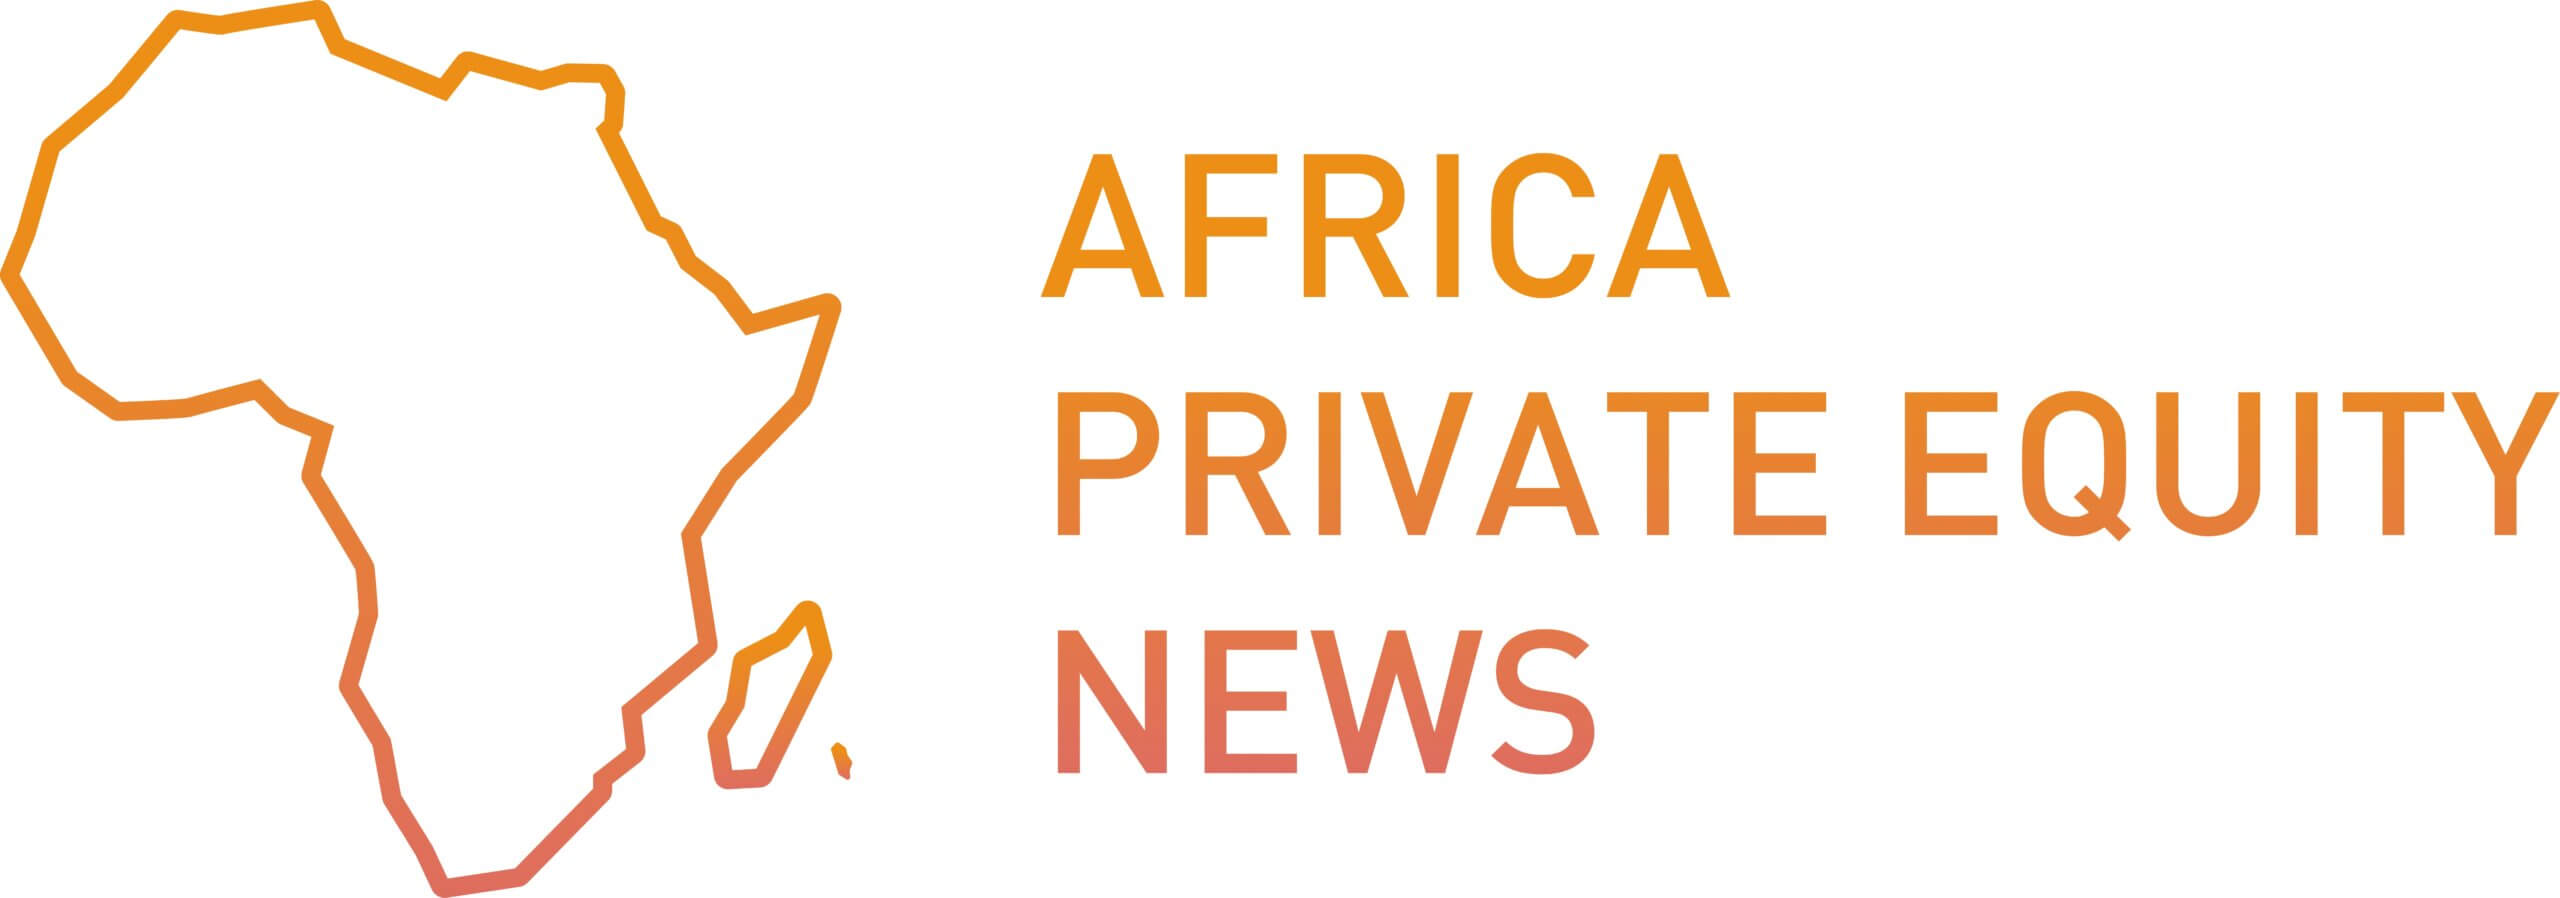 Africa Private Equity News